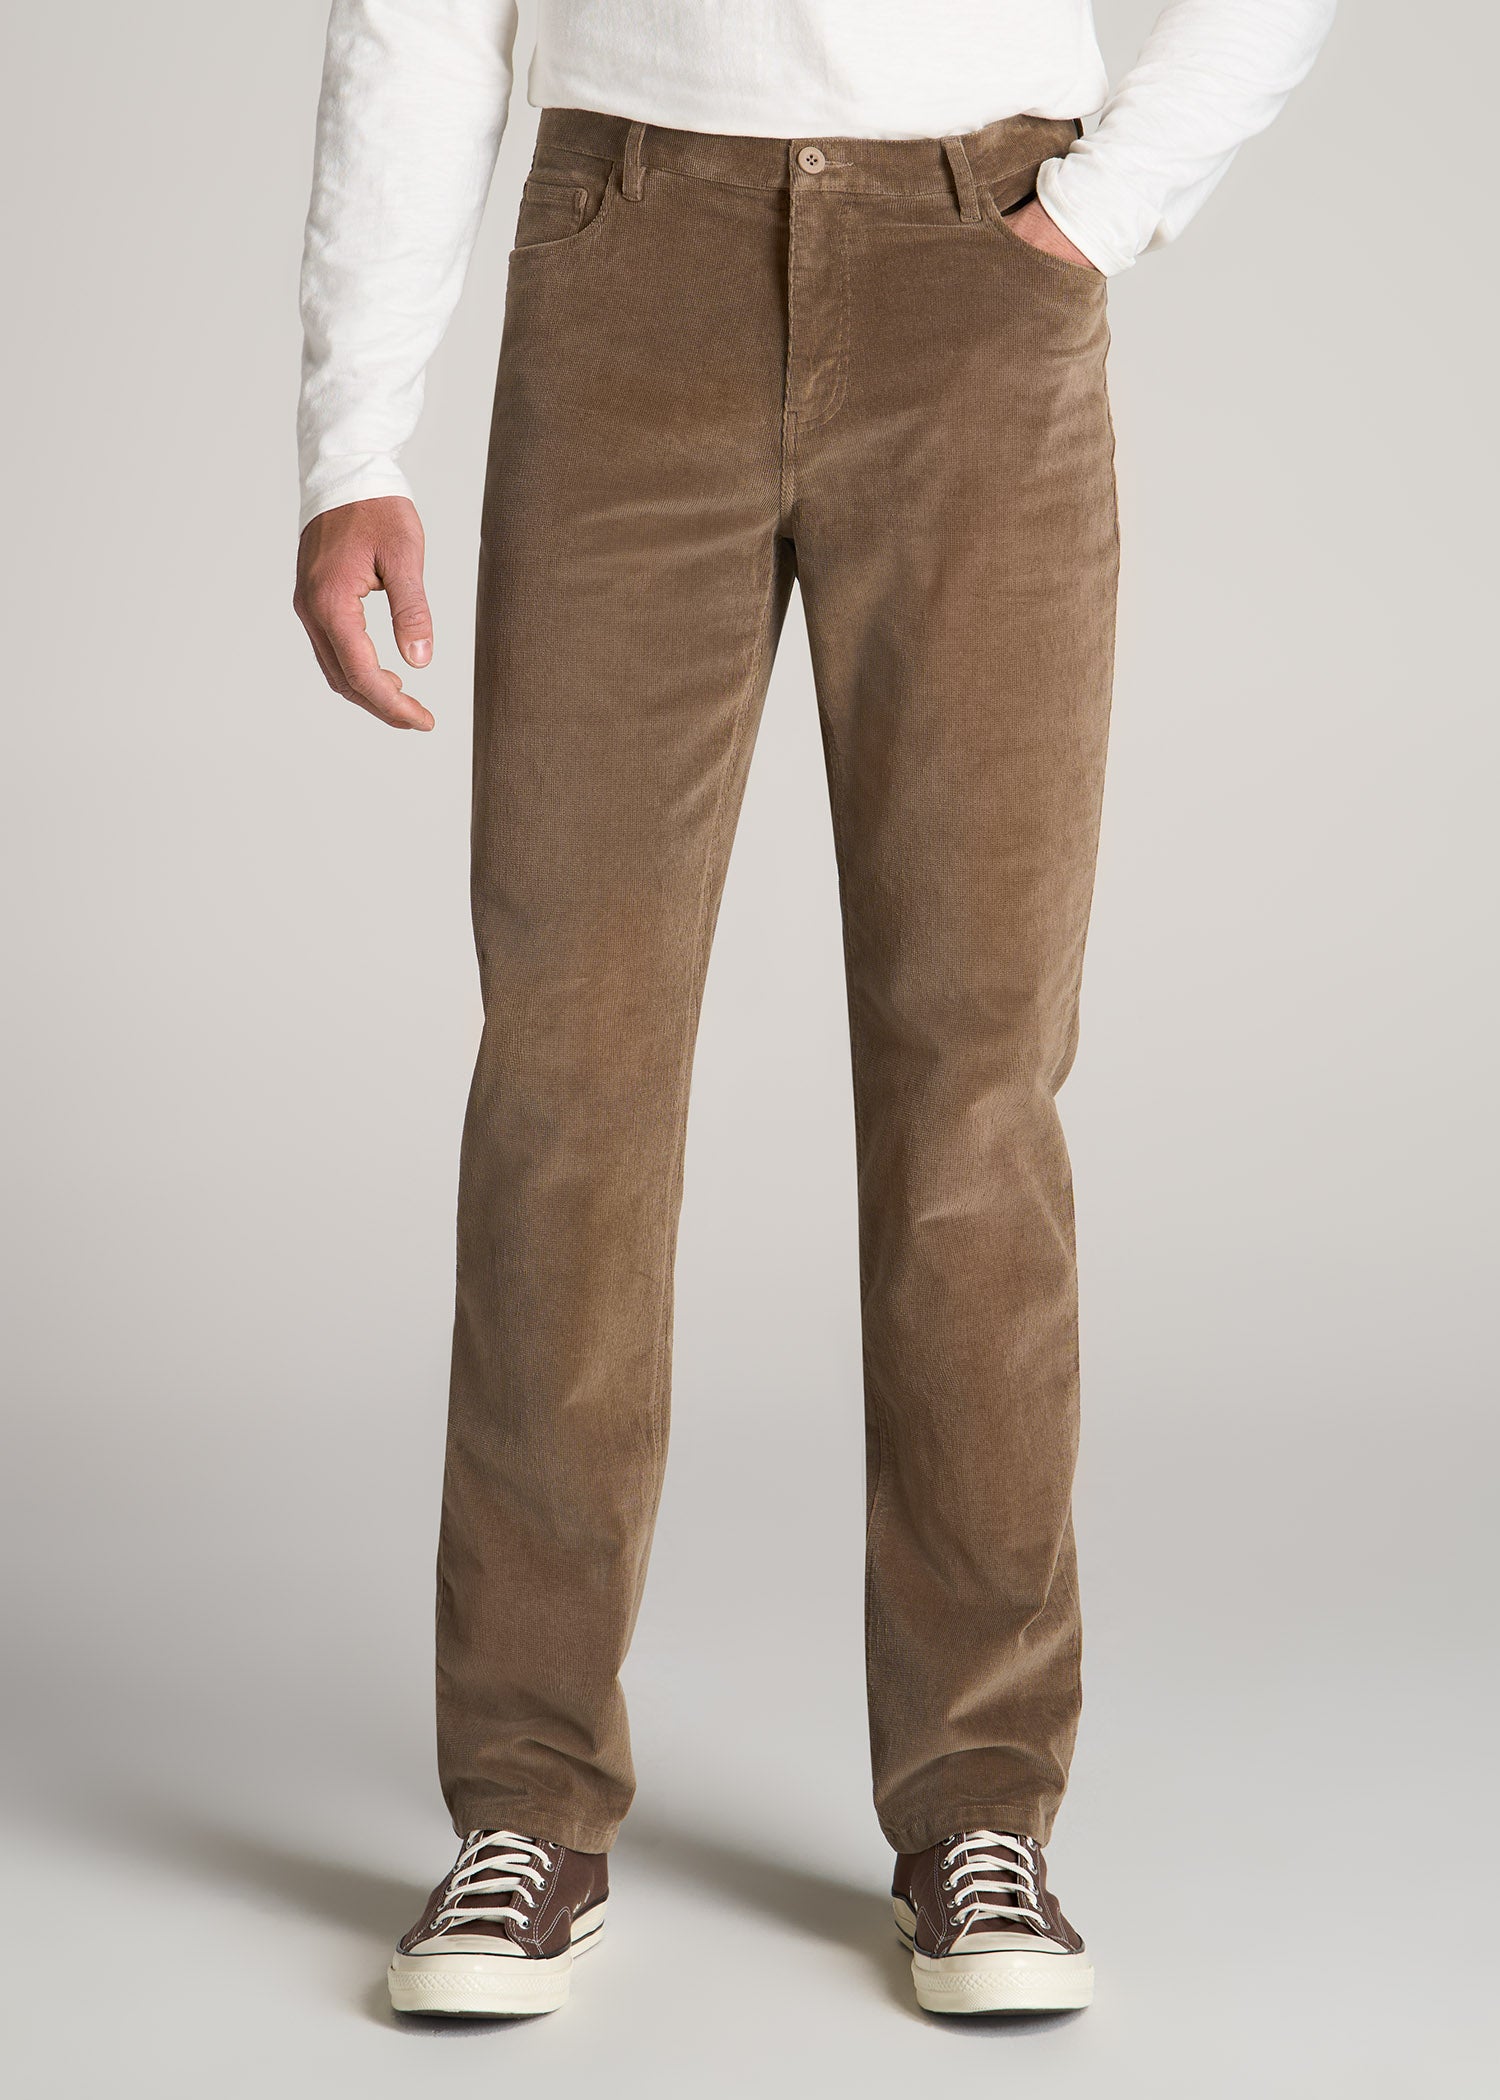 Men's Classic-Fit Corduroy Pant, Men's Stretch Corduroy Pants, Relaxed  Straight Fit Stretch Fall Winter Casual Chino